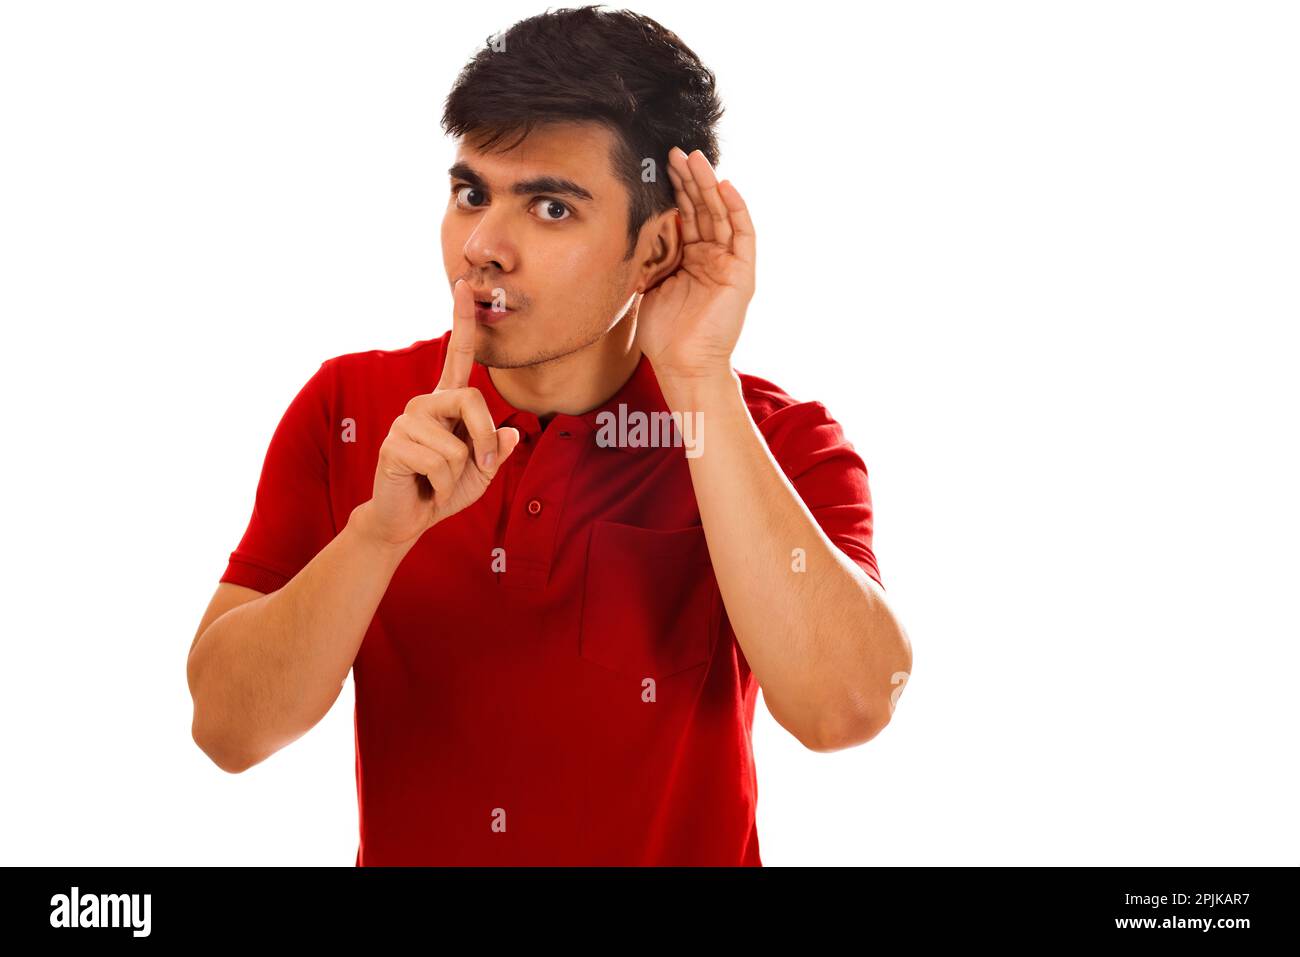 Portrait of young man showing hush gesture against white background Stock Photo